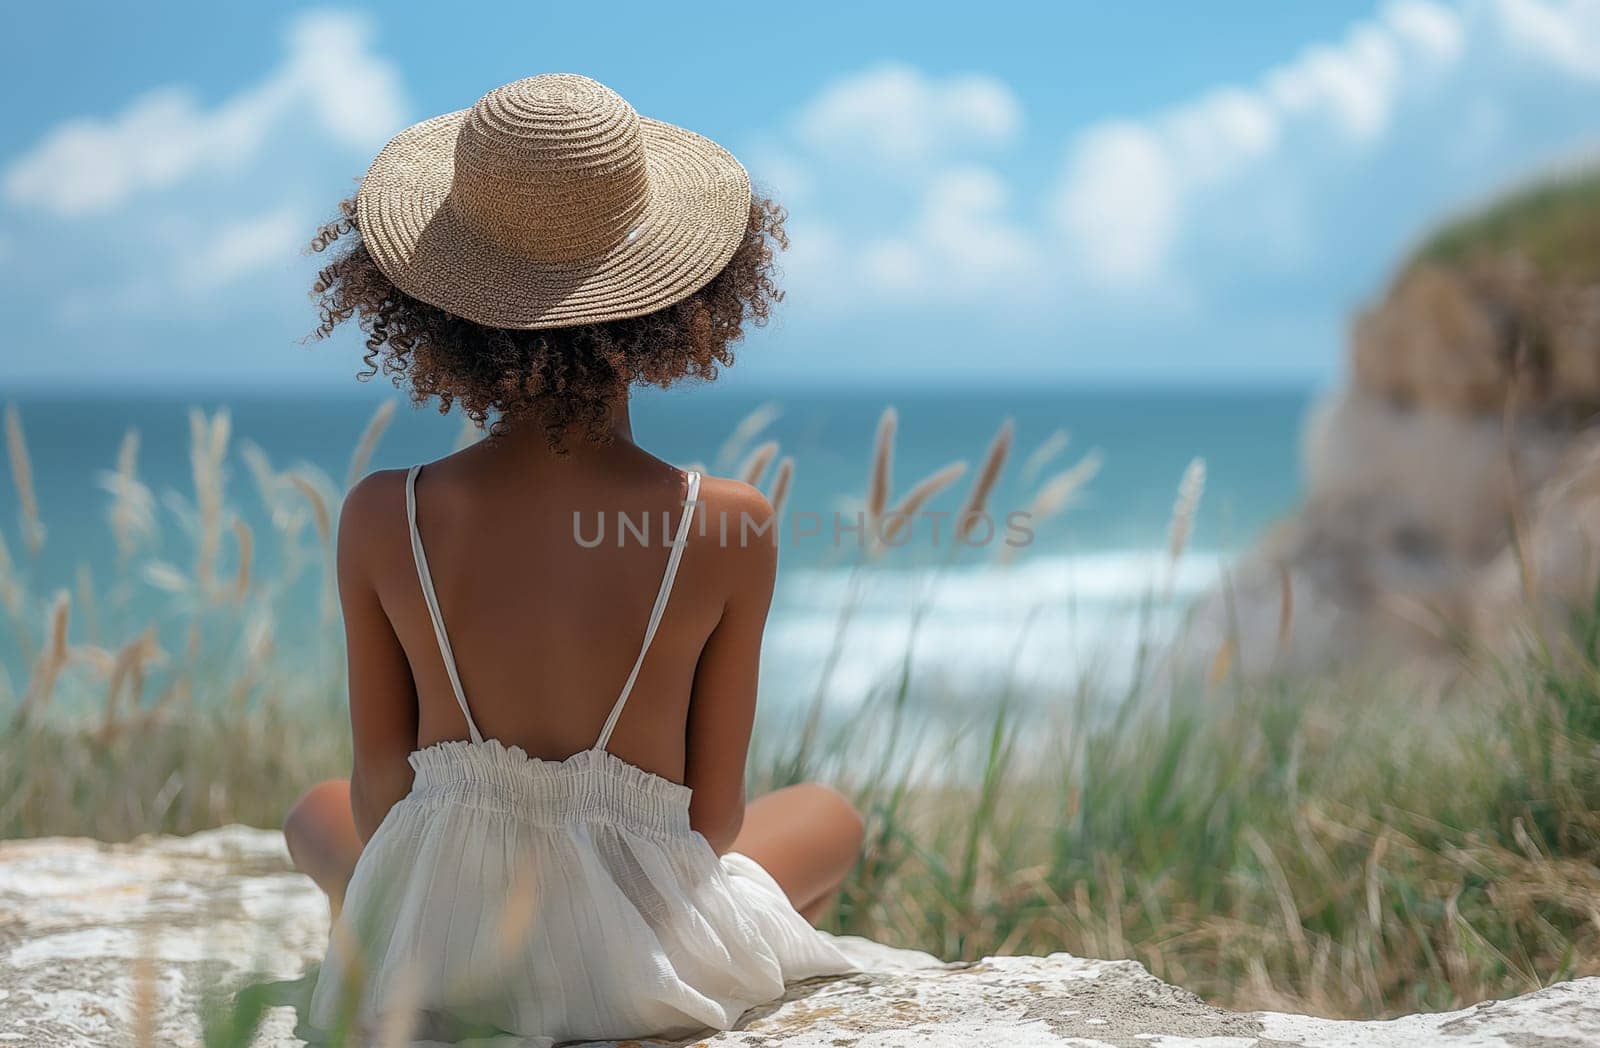 Black Woman in hat sitting peacefully on beachfront facing the ocean by Hype2art